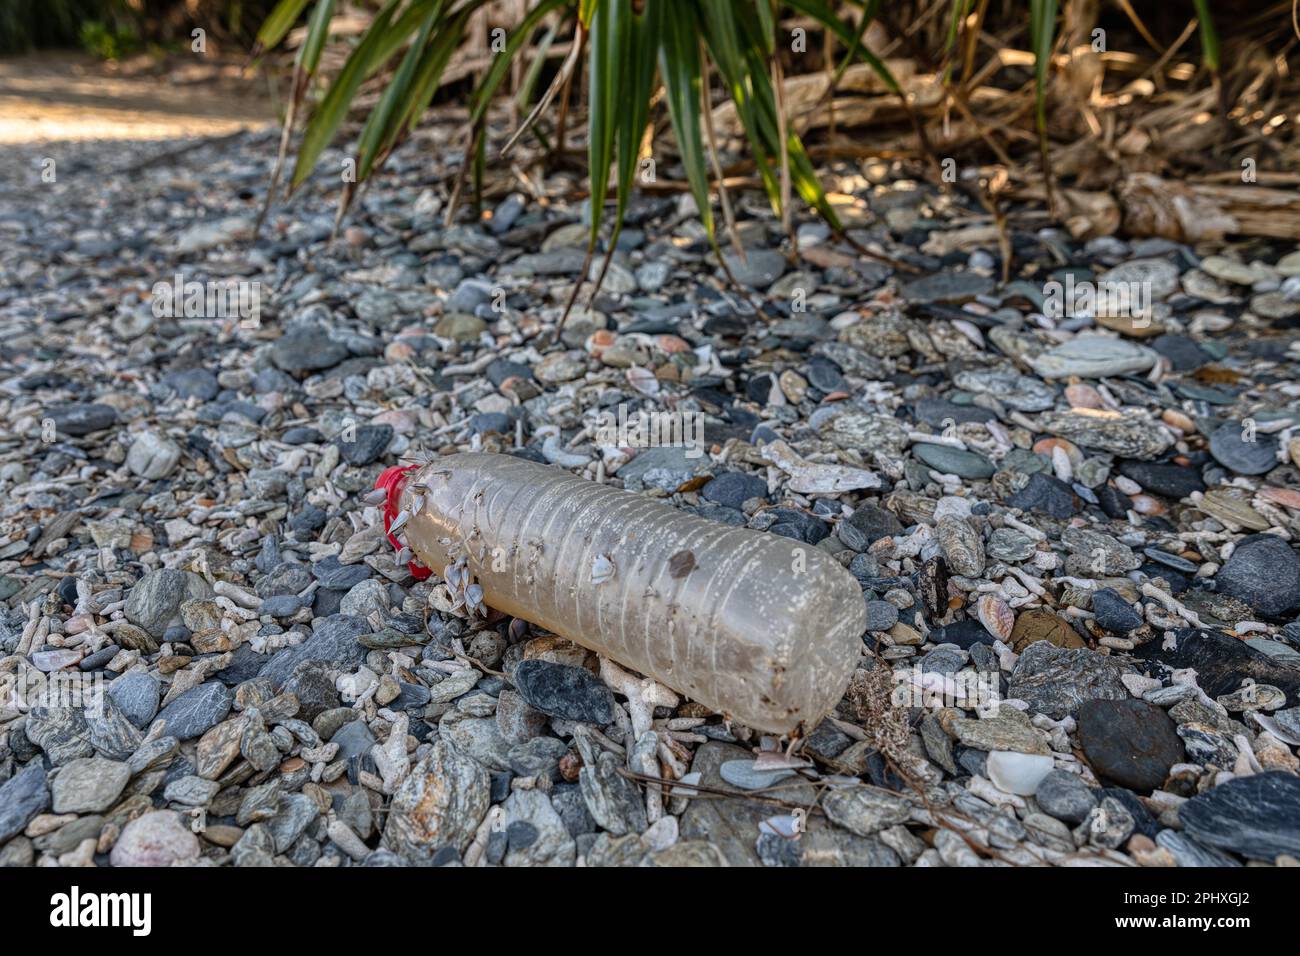 Plastic pollution - a plastic water bottle with mollusks attached to it is washed up on a beach in Okinawa, Japan Stock Photo